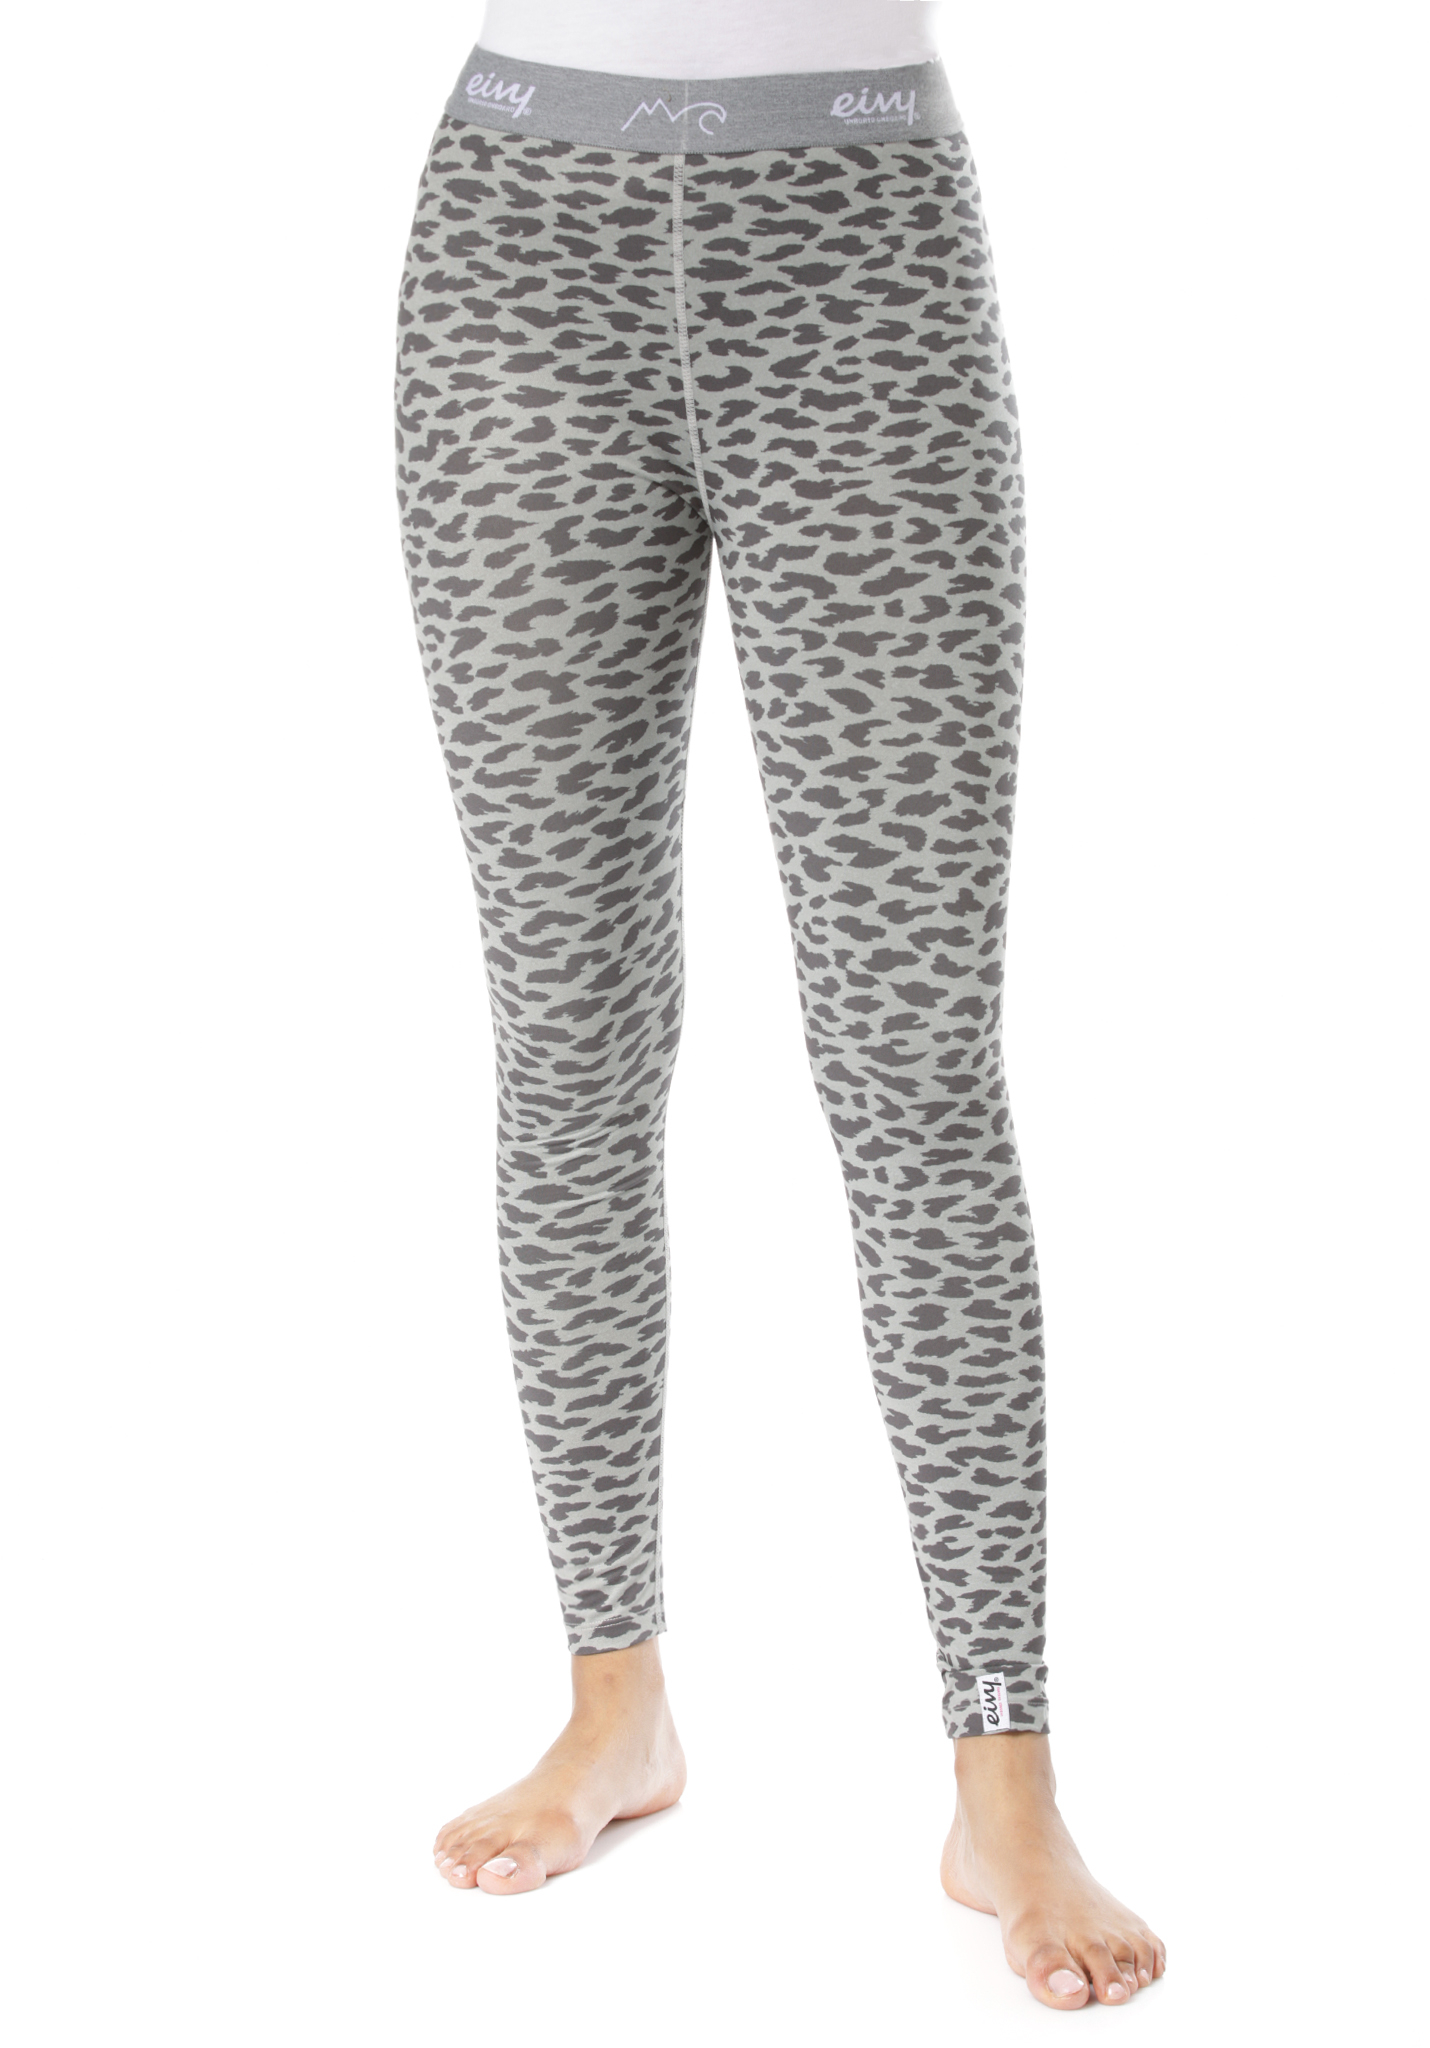 Eivy Icecold Tights´20 Funktionshose grey leopard XL